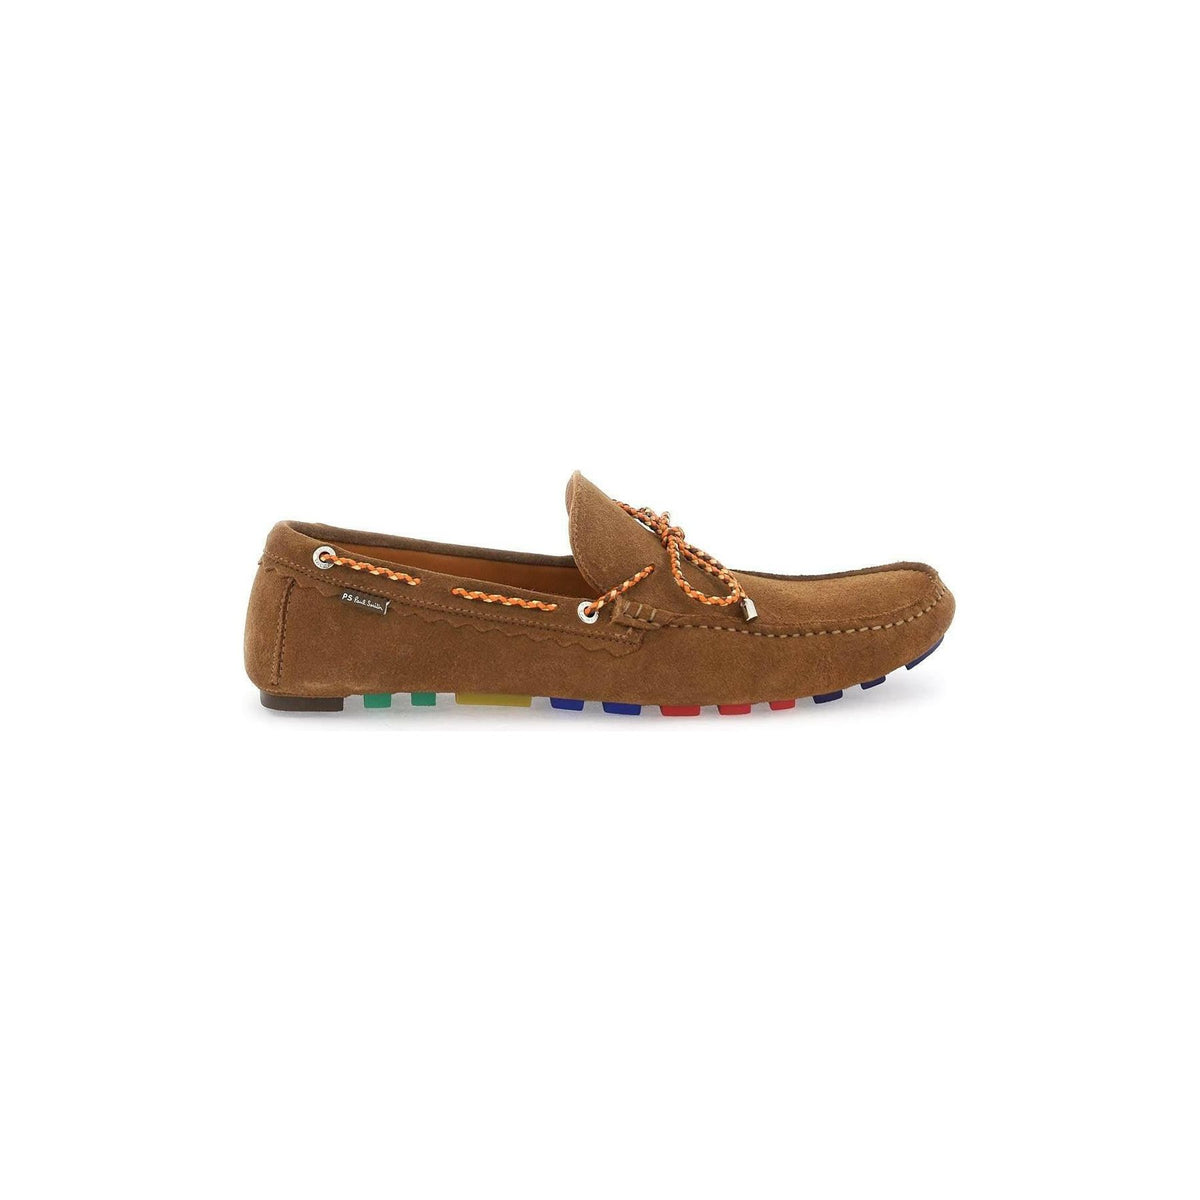 PS PAUL SMITH - Tan Suede Springfield Driving Loafers - JOHN JULIA